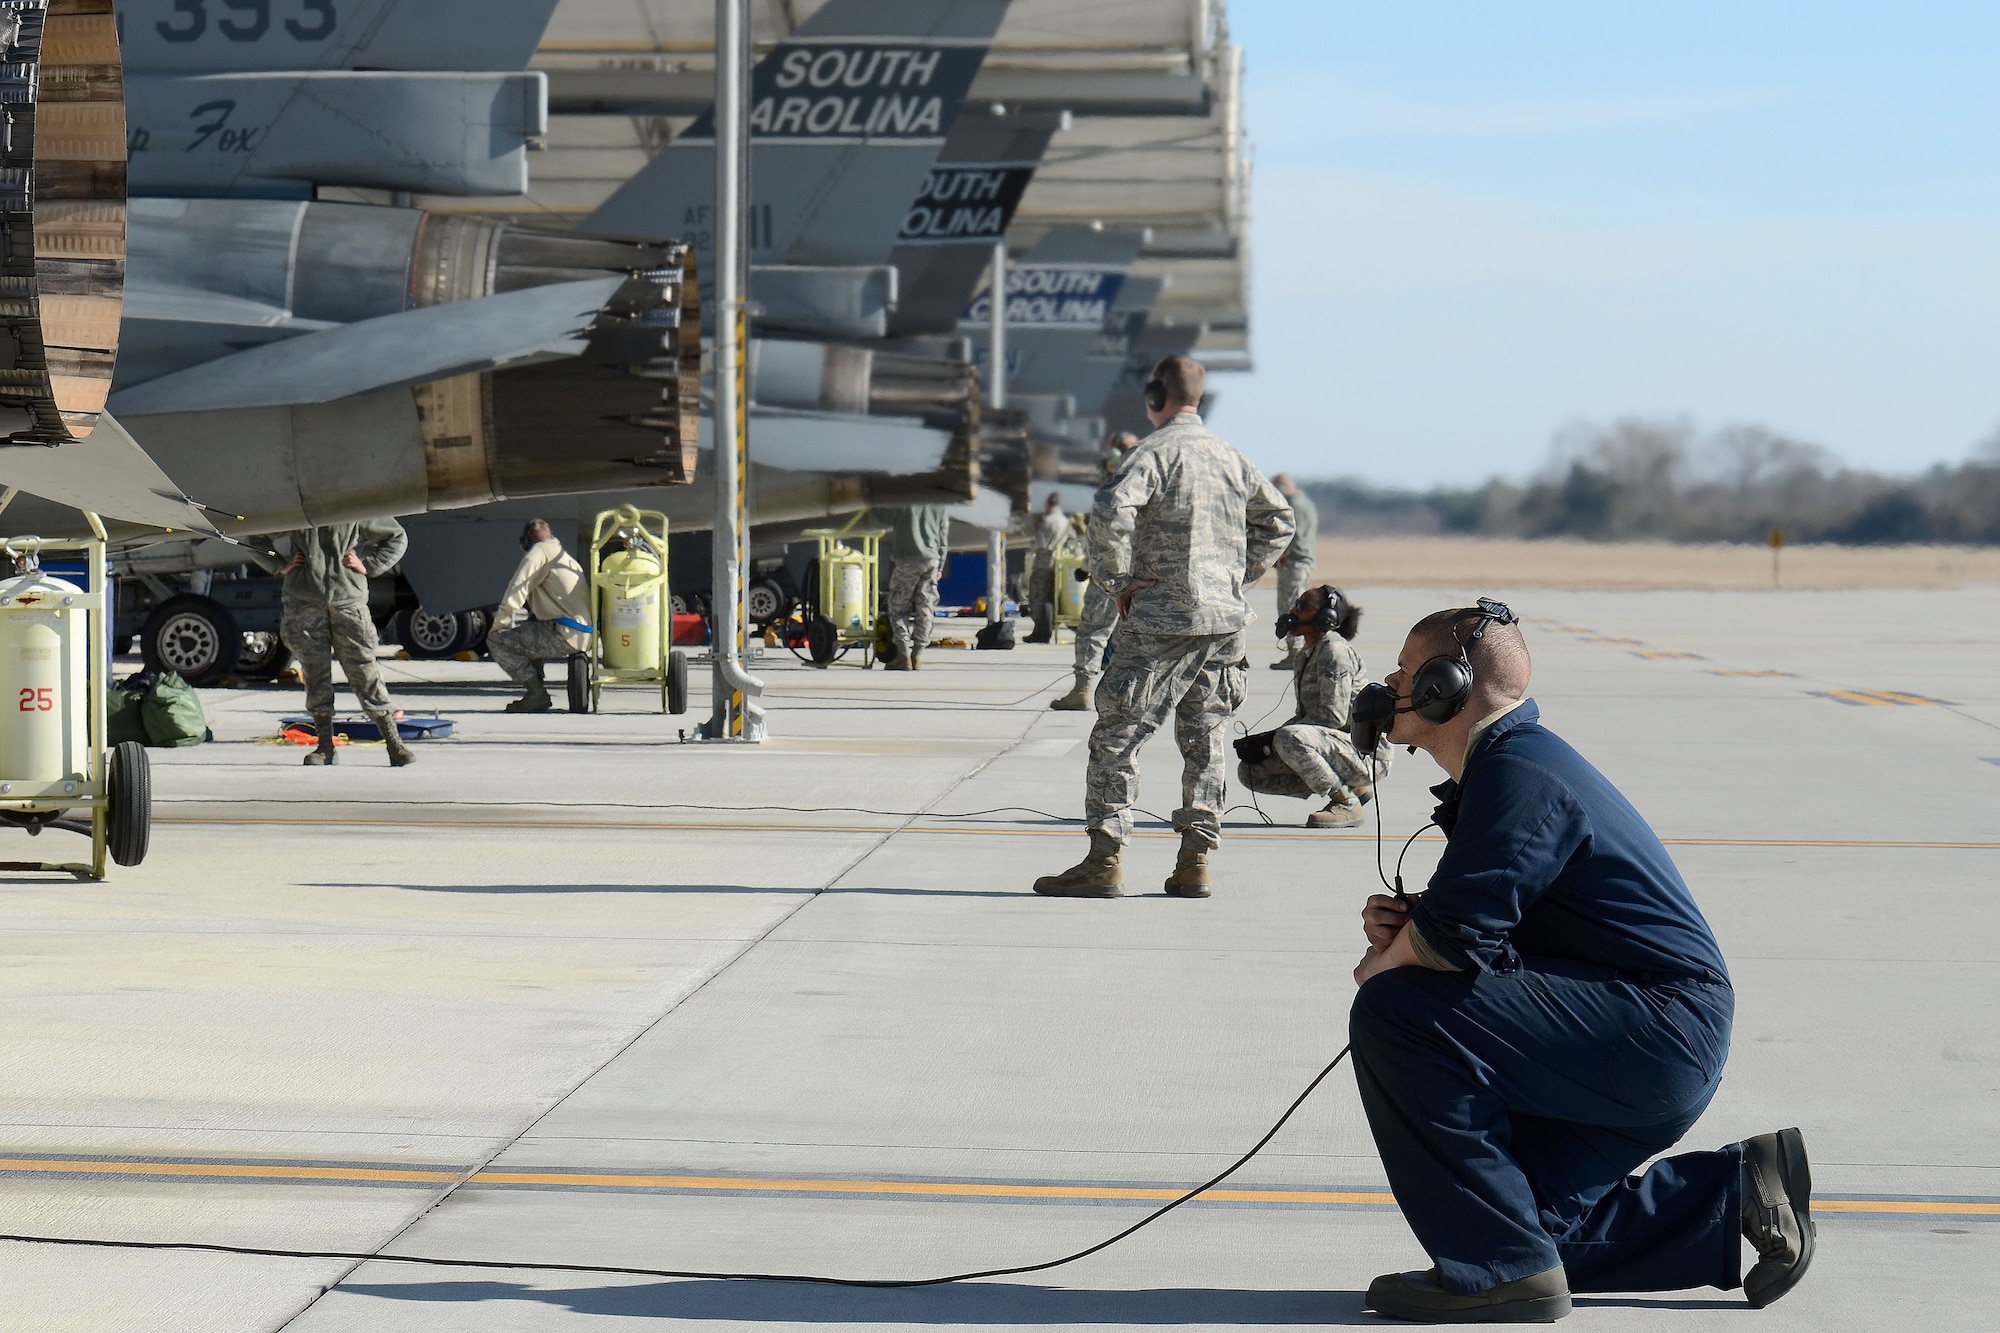 U.S. Airmen assigned to the 169th Fighter Wing at McEntire Joint National Guard Base, South Carolina Air National Guard, participate in surge flying operations Feb. 7, 2015. The surge encompasses high tempo flying as part of vital training for deployments. (U.S. Air National Guard photo by Airman 1st Class Ashleigh S. Pavelek/Released)